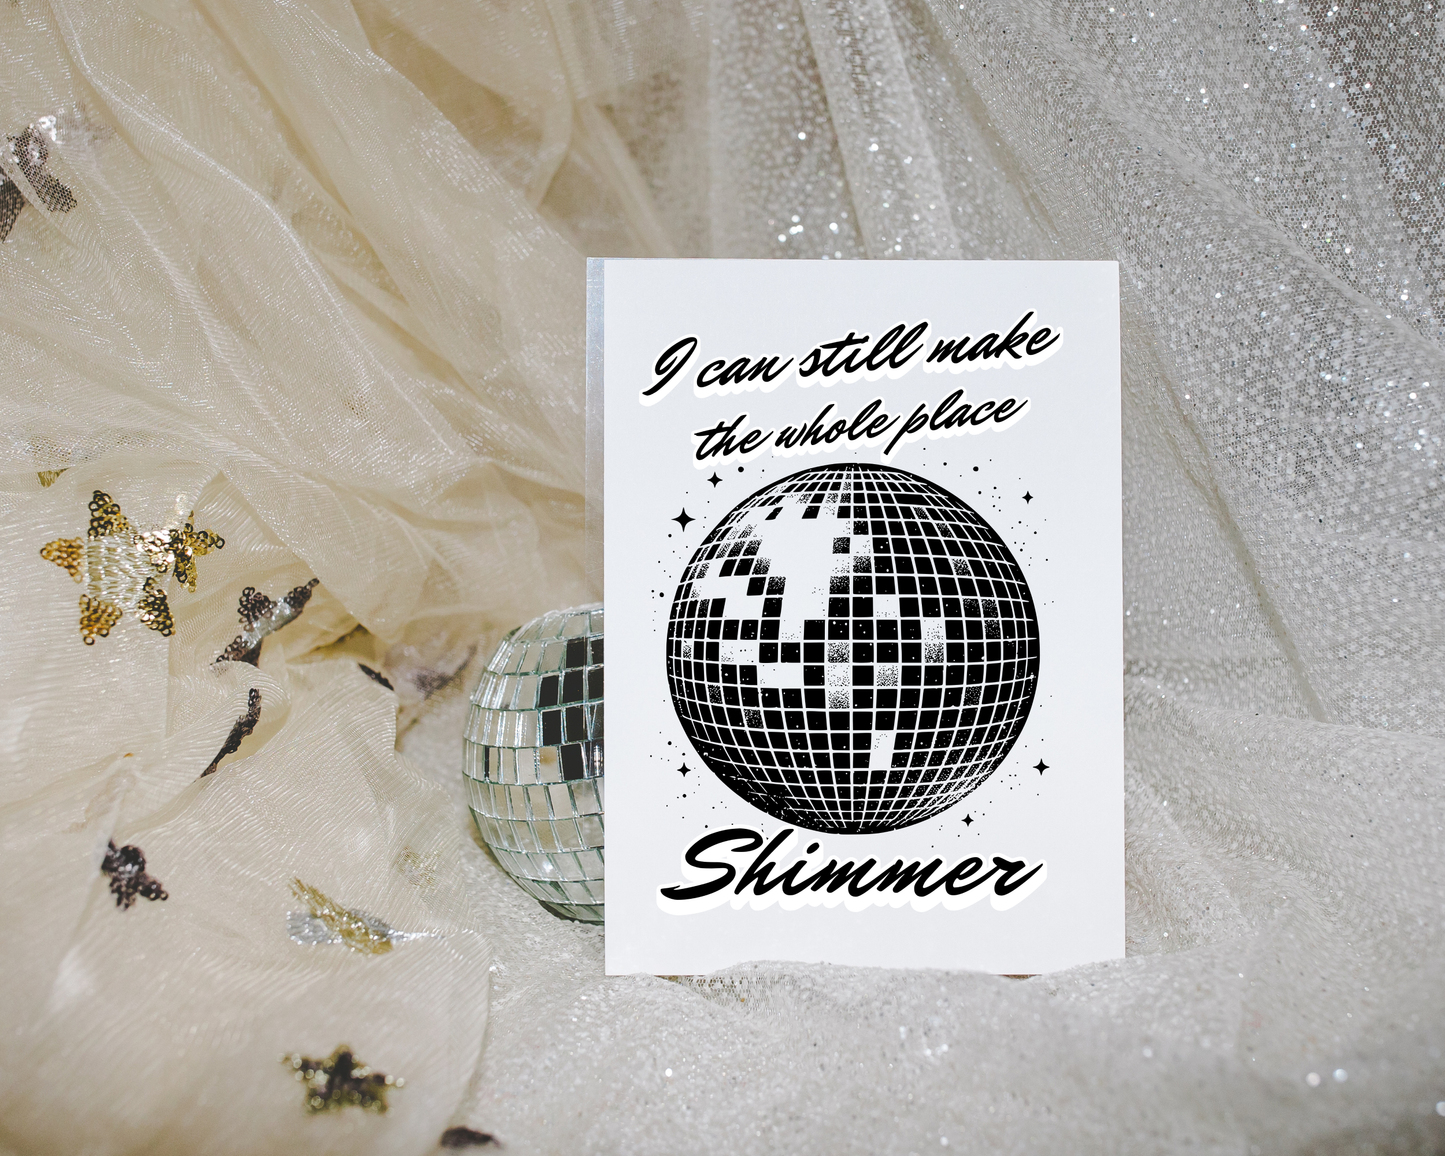 I Can Still Make The Whole Place Shimmer print